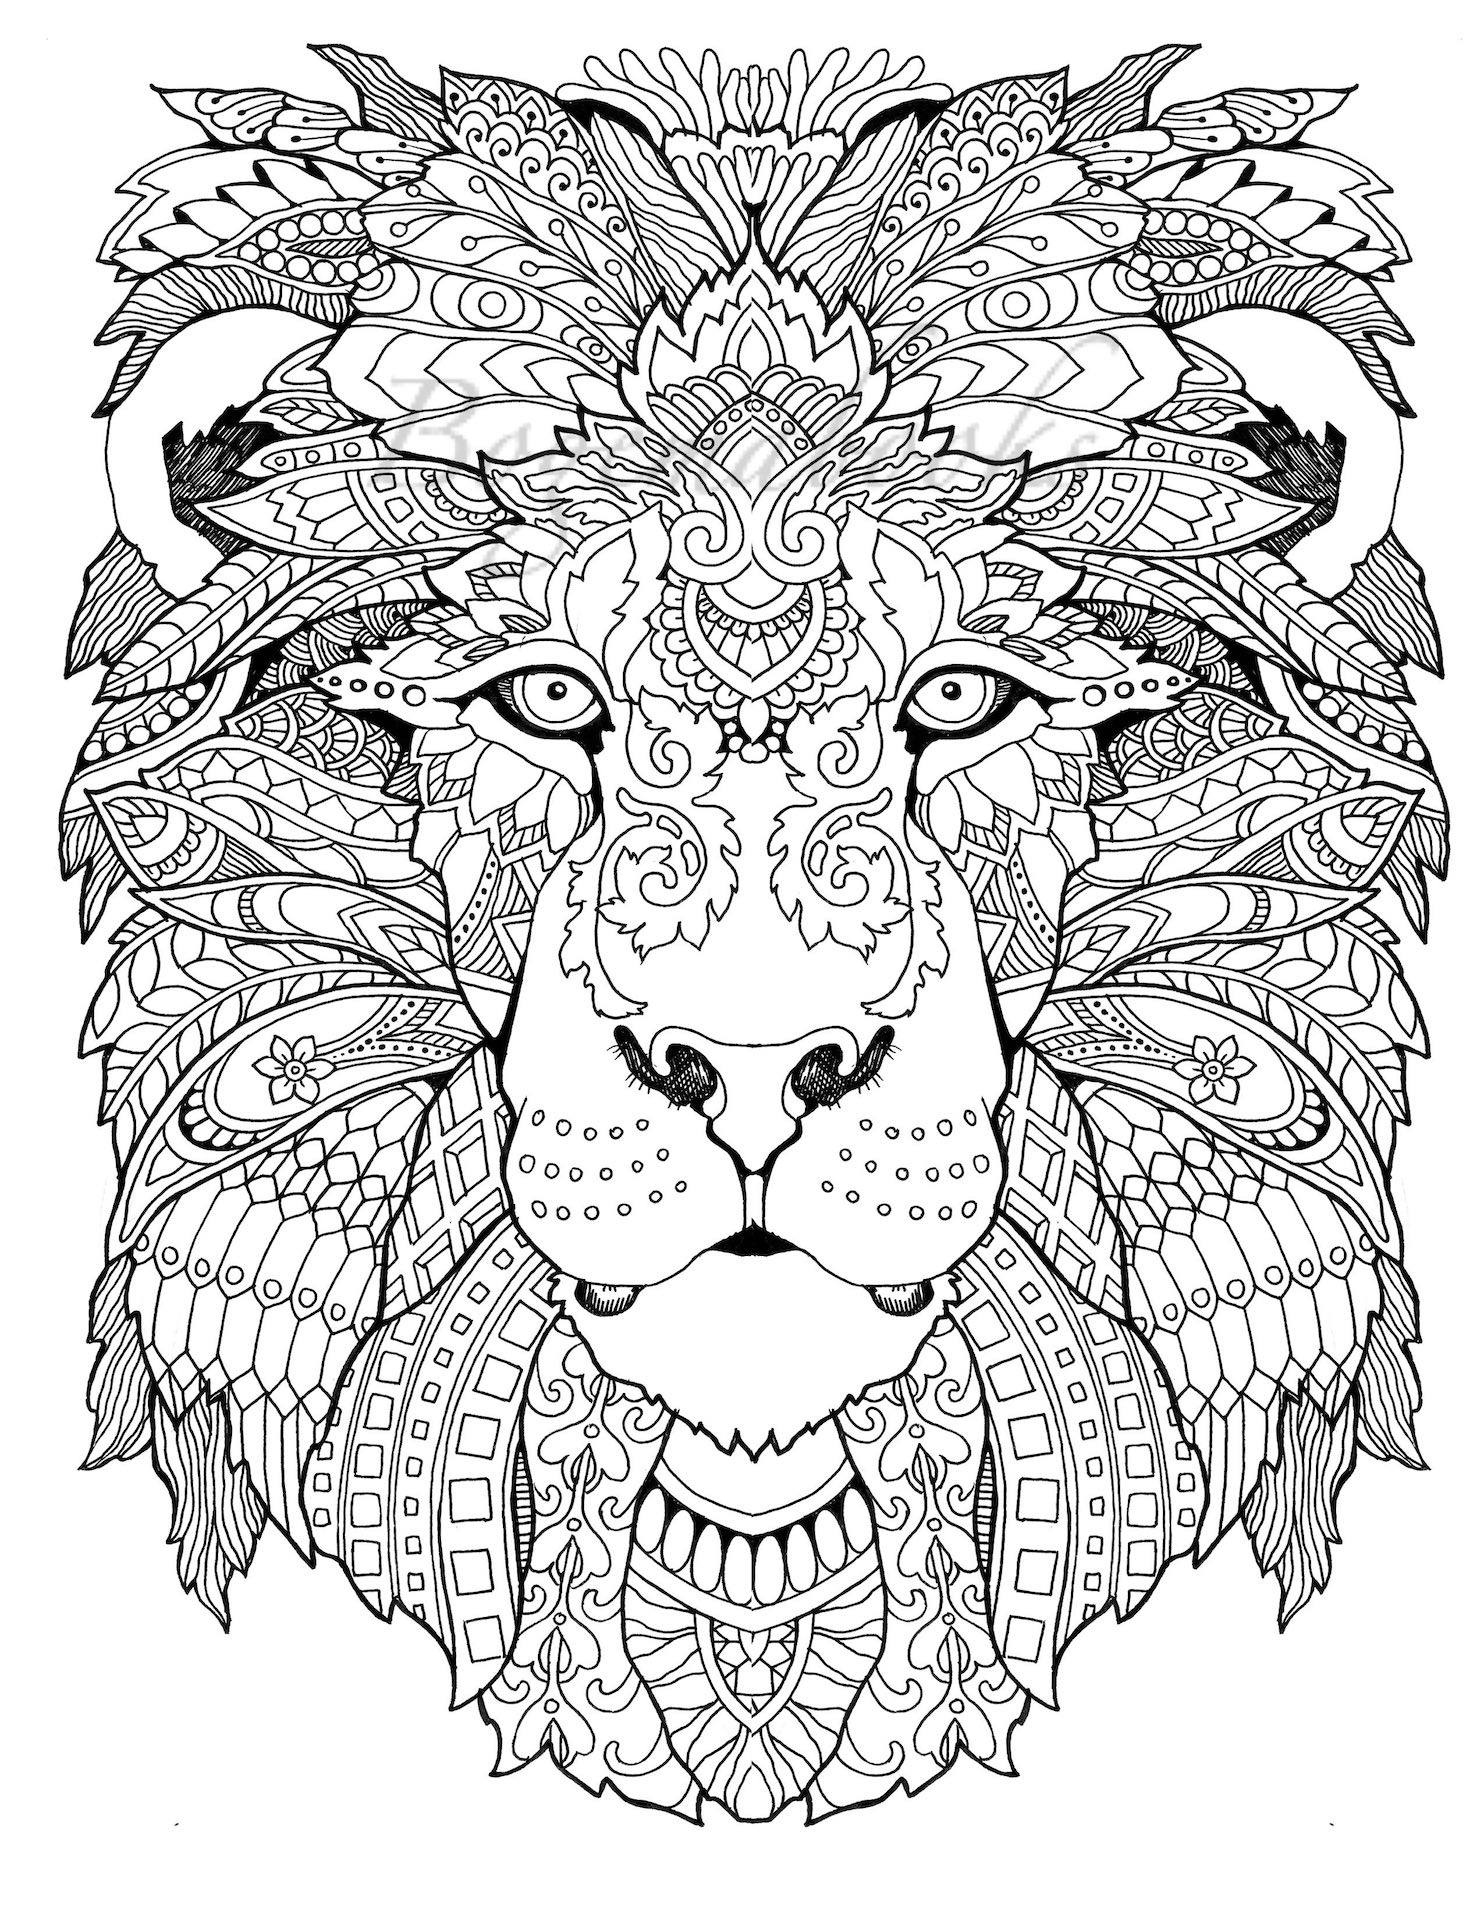 Awesome Designs 100 Animal Coloring Book For Adults: Anti-Stress Adult  Coloring Book With Awesome And Relaxing Beautiful Animals Designs For Men  And Women Coloring Pages by Rhianna Blunder